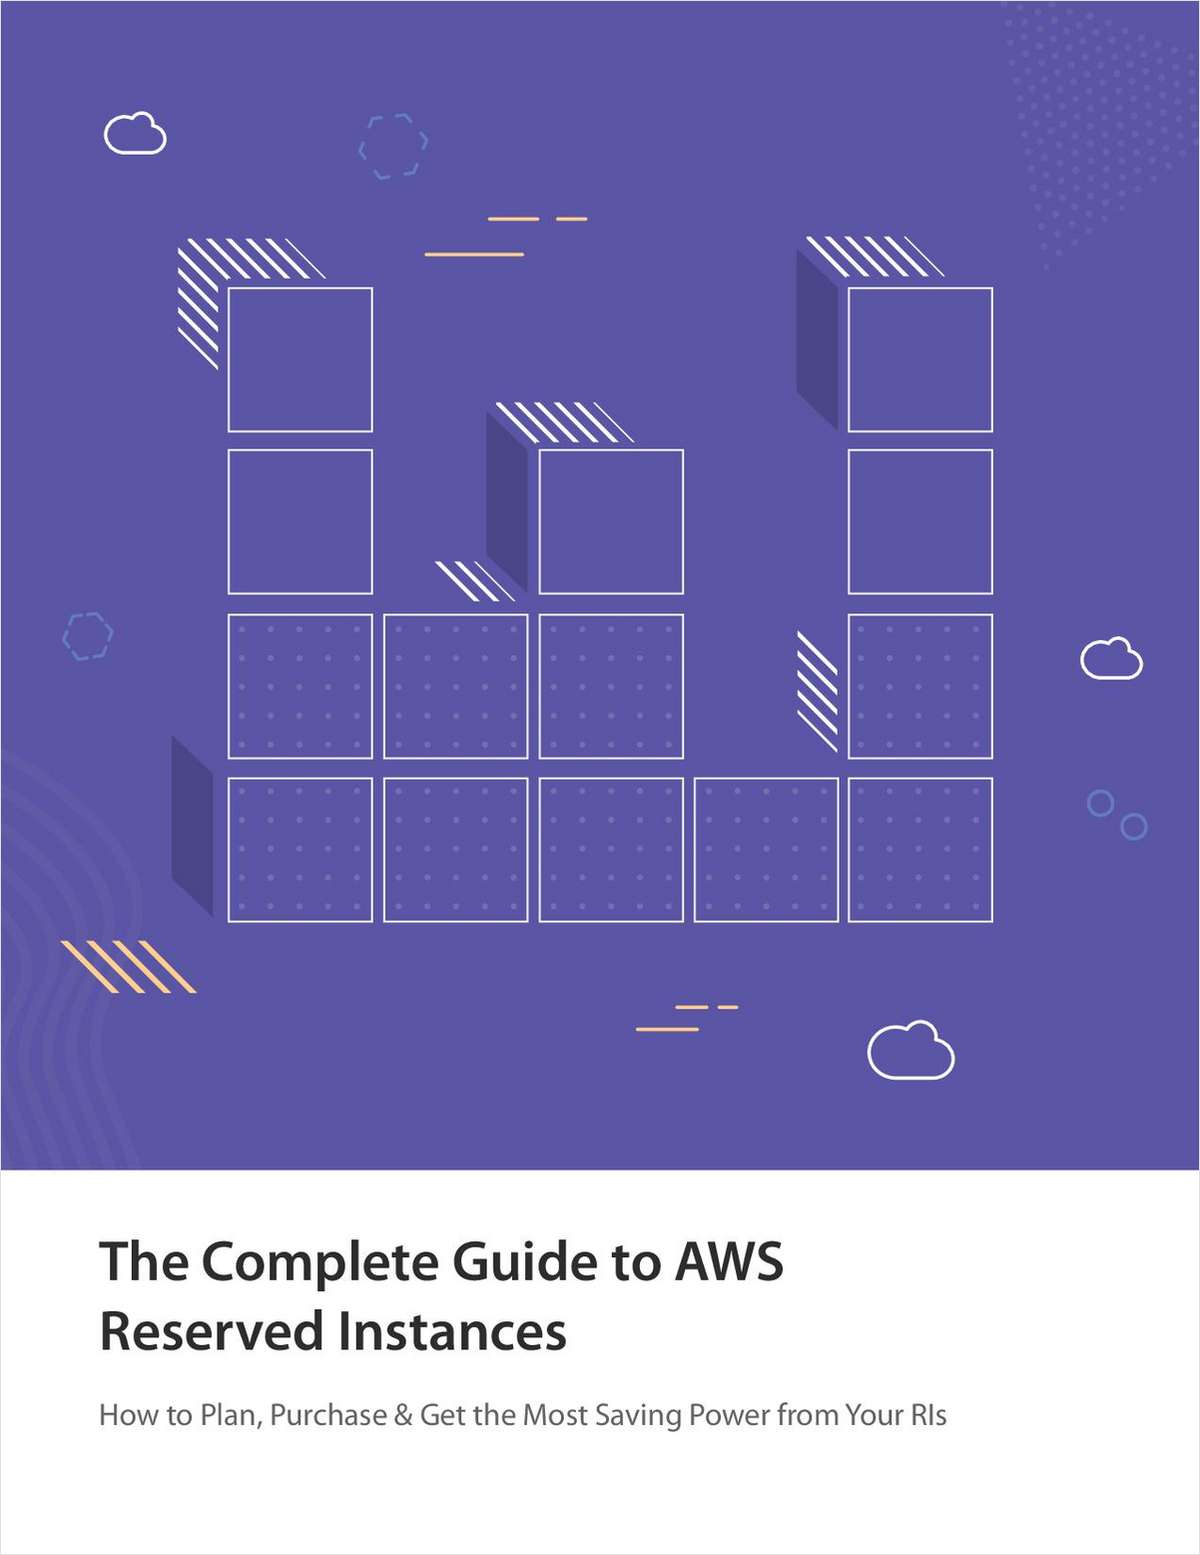 The Complete Guide to Saving with AWS Reserved Instances